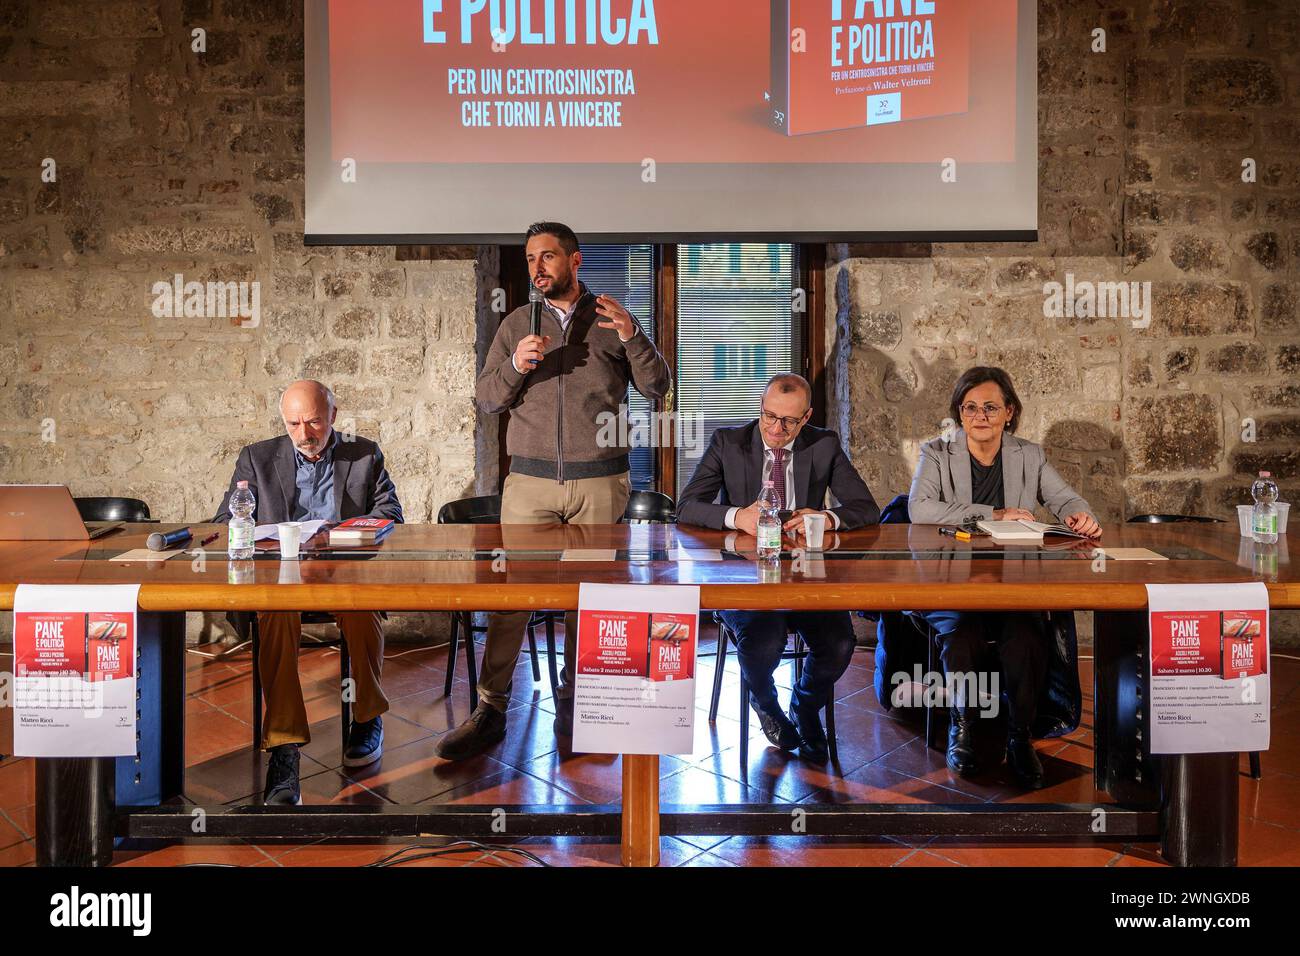 Matteo Ricci, mayor of Pesaro and president of ALI, presents his fourth book 'Pane e politica' in Ascoli in the presence of Emidio Nardini, candidate for mayor of Ascoli Piceno, Anna Casini, regional councilor, and Francesco Ameli, provincial secretary of the Democratic Party. The book chronicles the Pesaro mayor's innovative initiative to reconnect with the electorate after the Democratic Party's defeat in the 2022 general election. Credit: Andrea Vagnoni/Alamy Live News Stock Photo